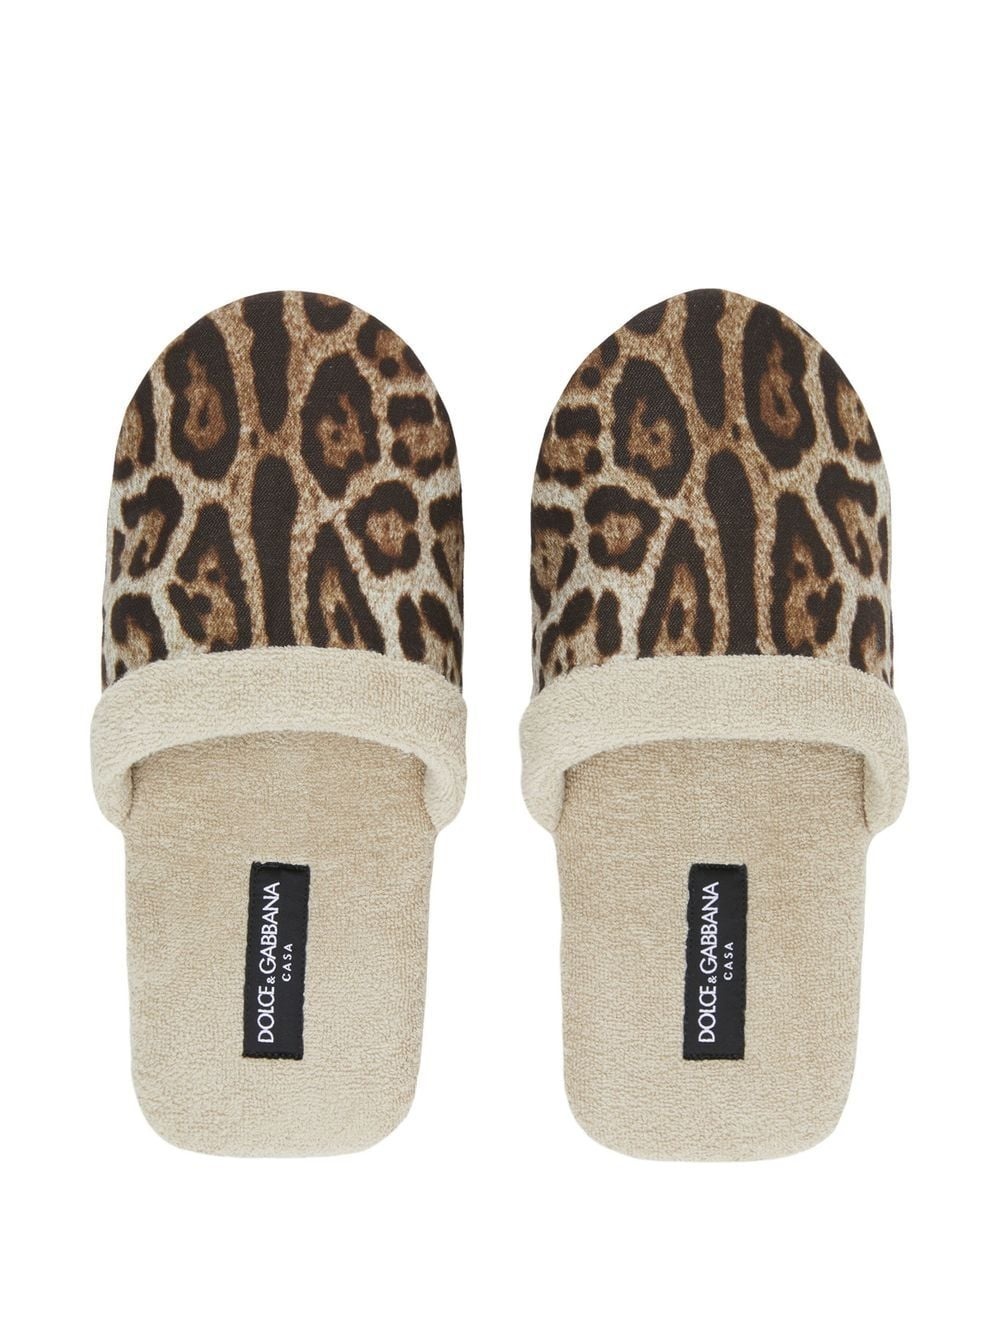 leopard-print terry slippers - 4